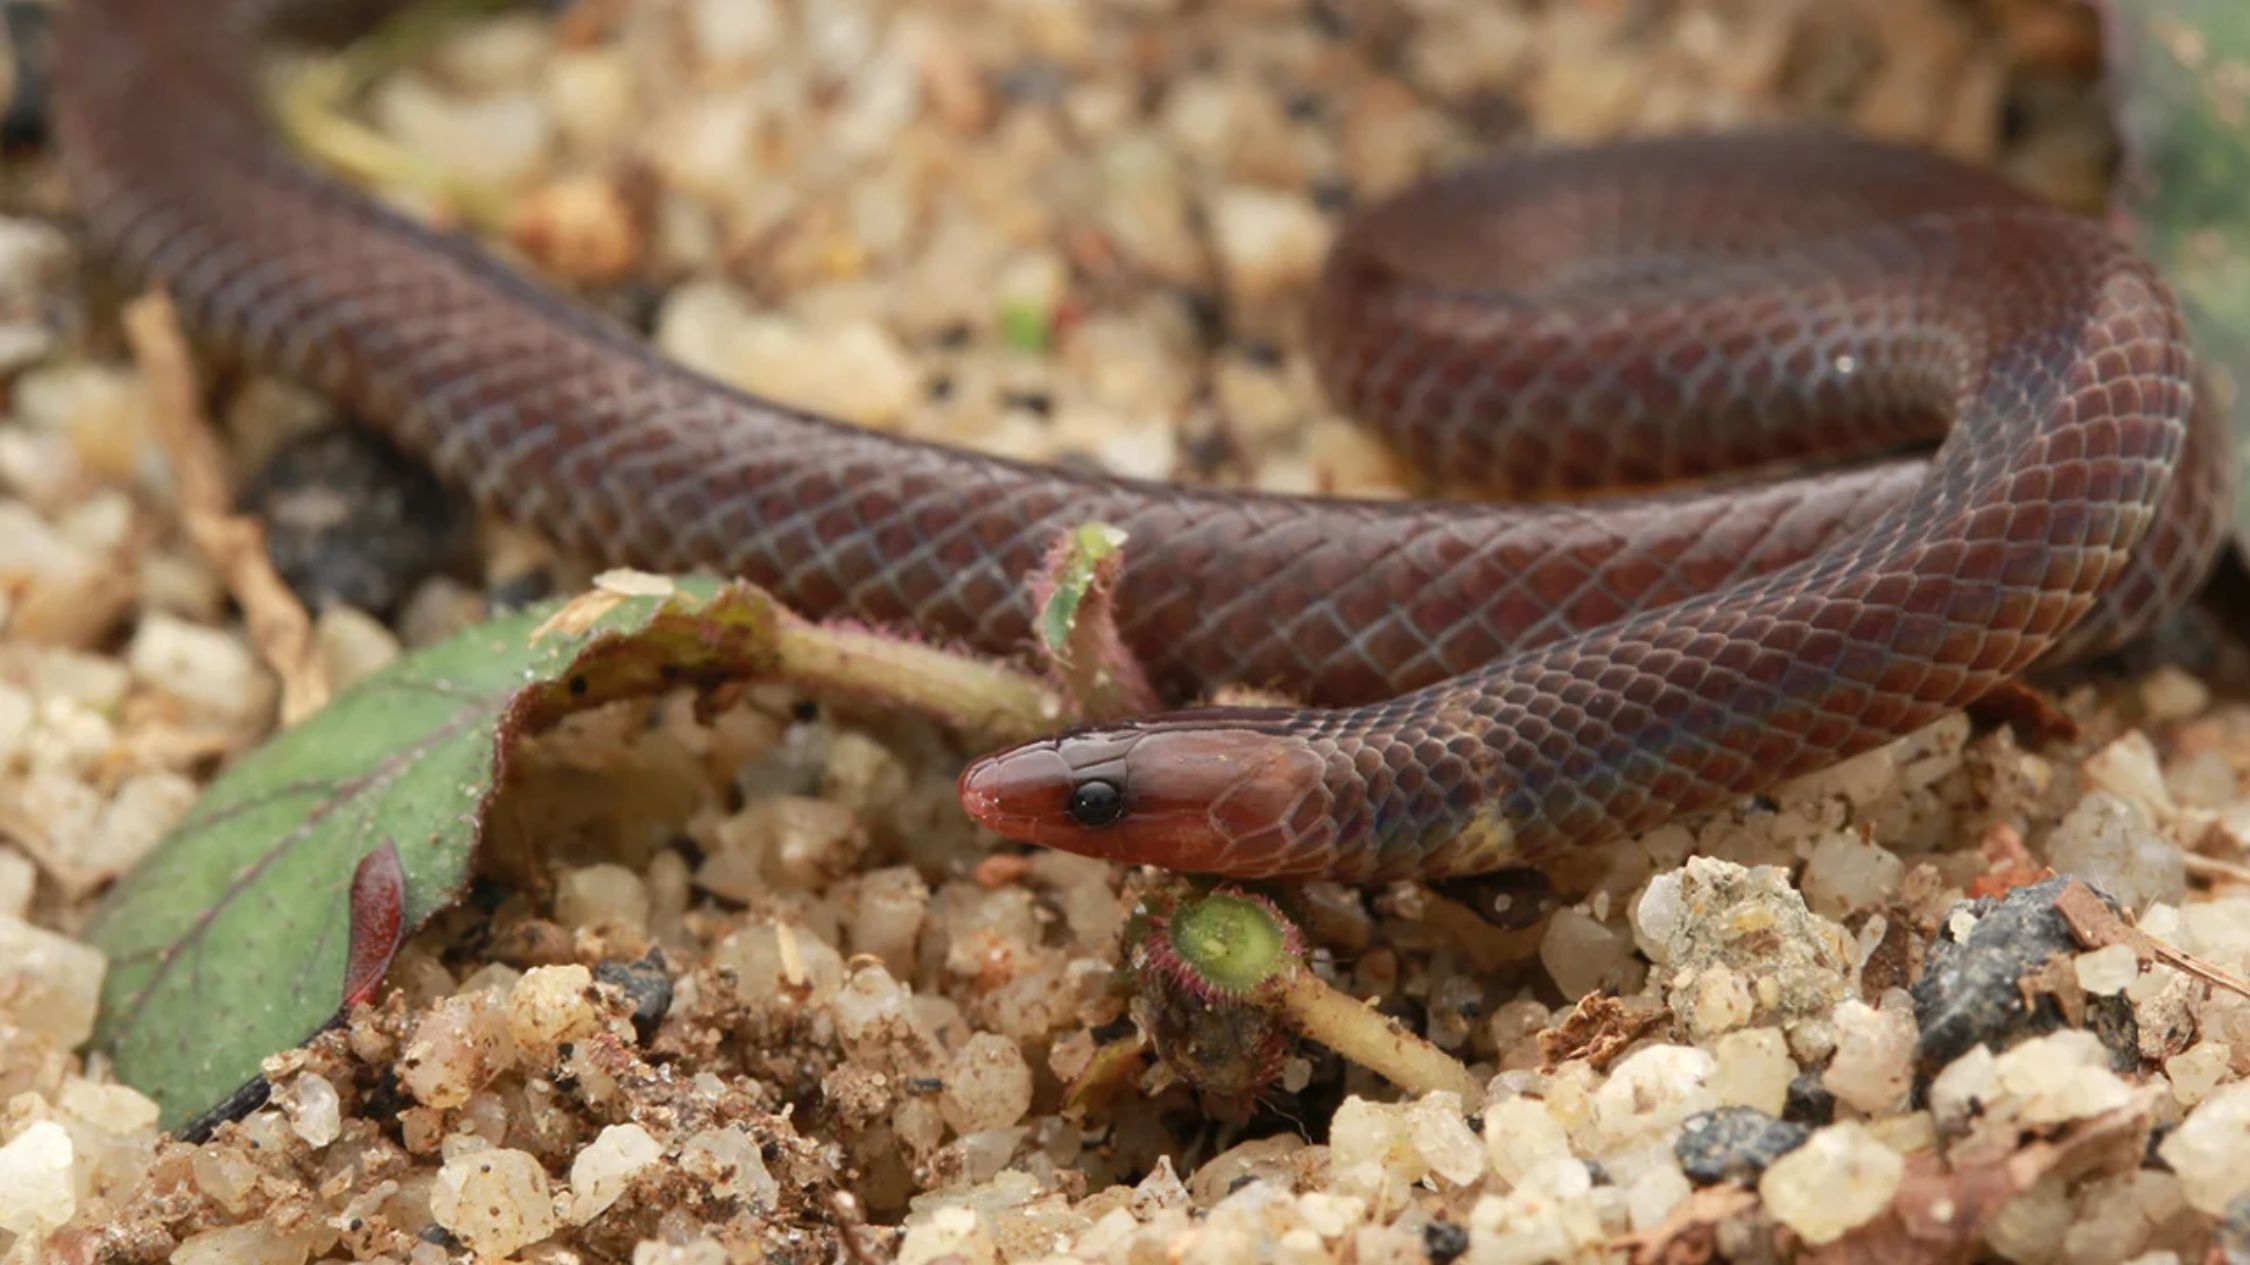 This shy little snake can move to safety